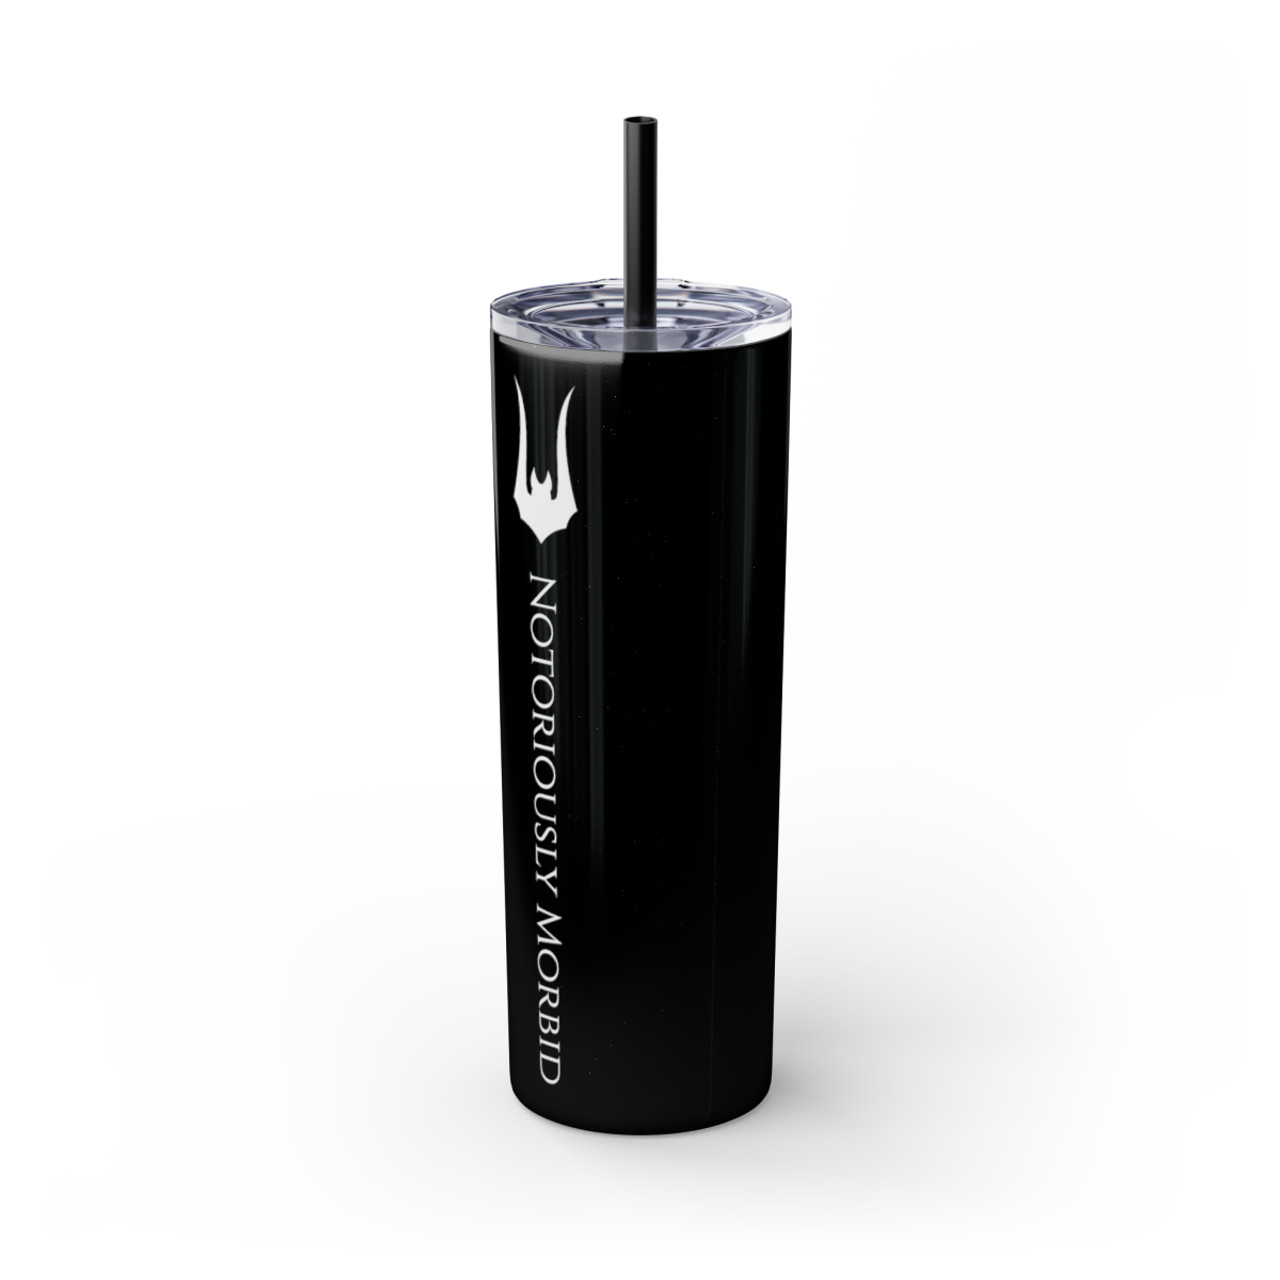 https://cdn11.bigcommerce.com/s-6h3ho/images/stencil/1280x1280/products/6464/26826/notoriously-morbid-skinny-tumbler-with-straw-20oz__97177.1695660474.jpg?c=2